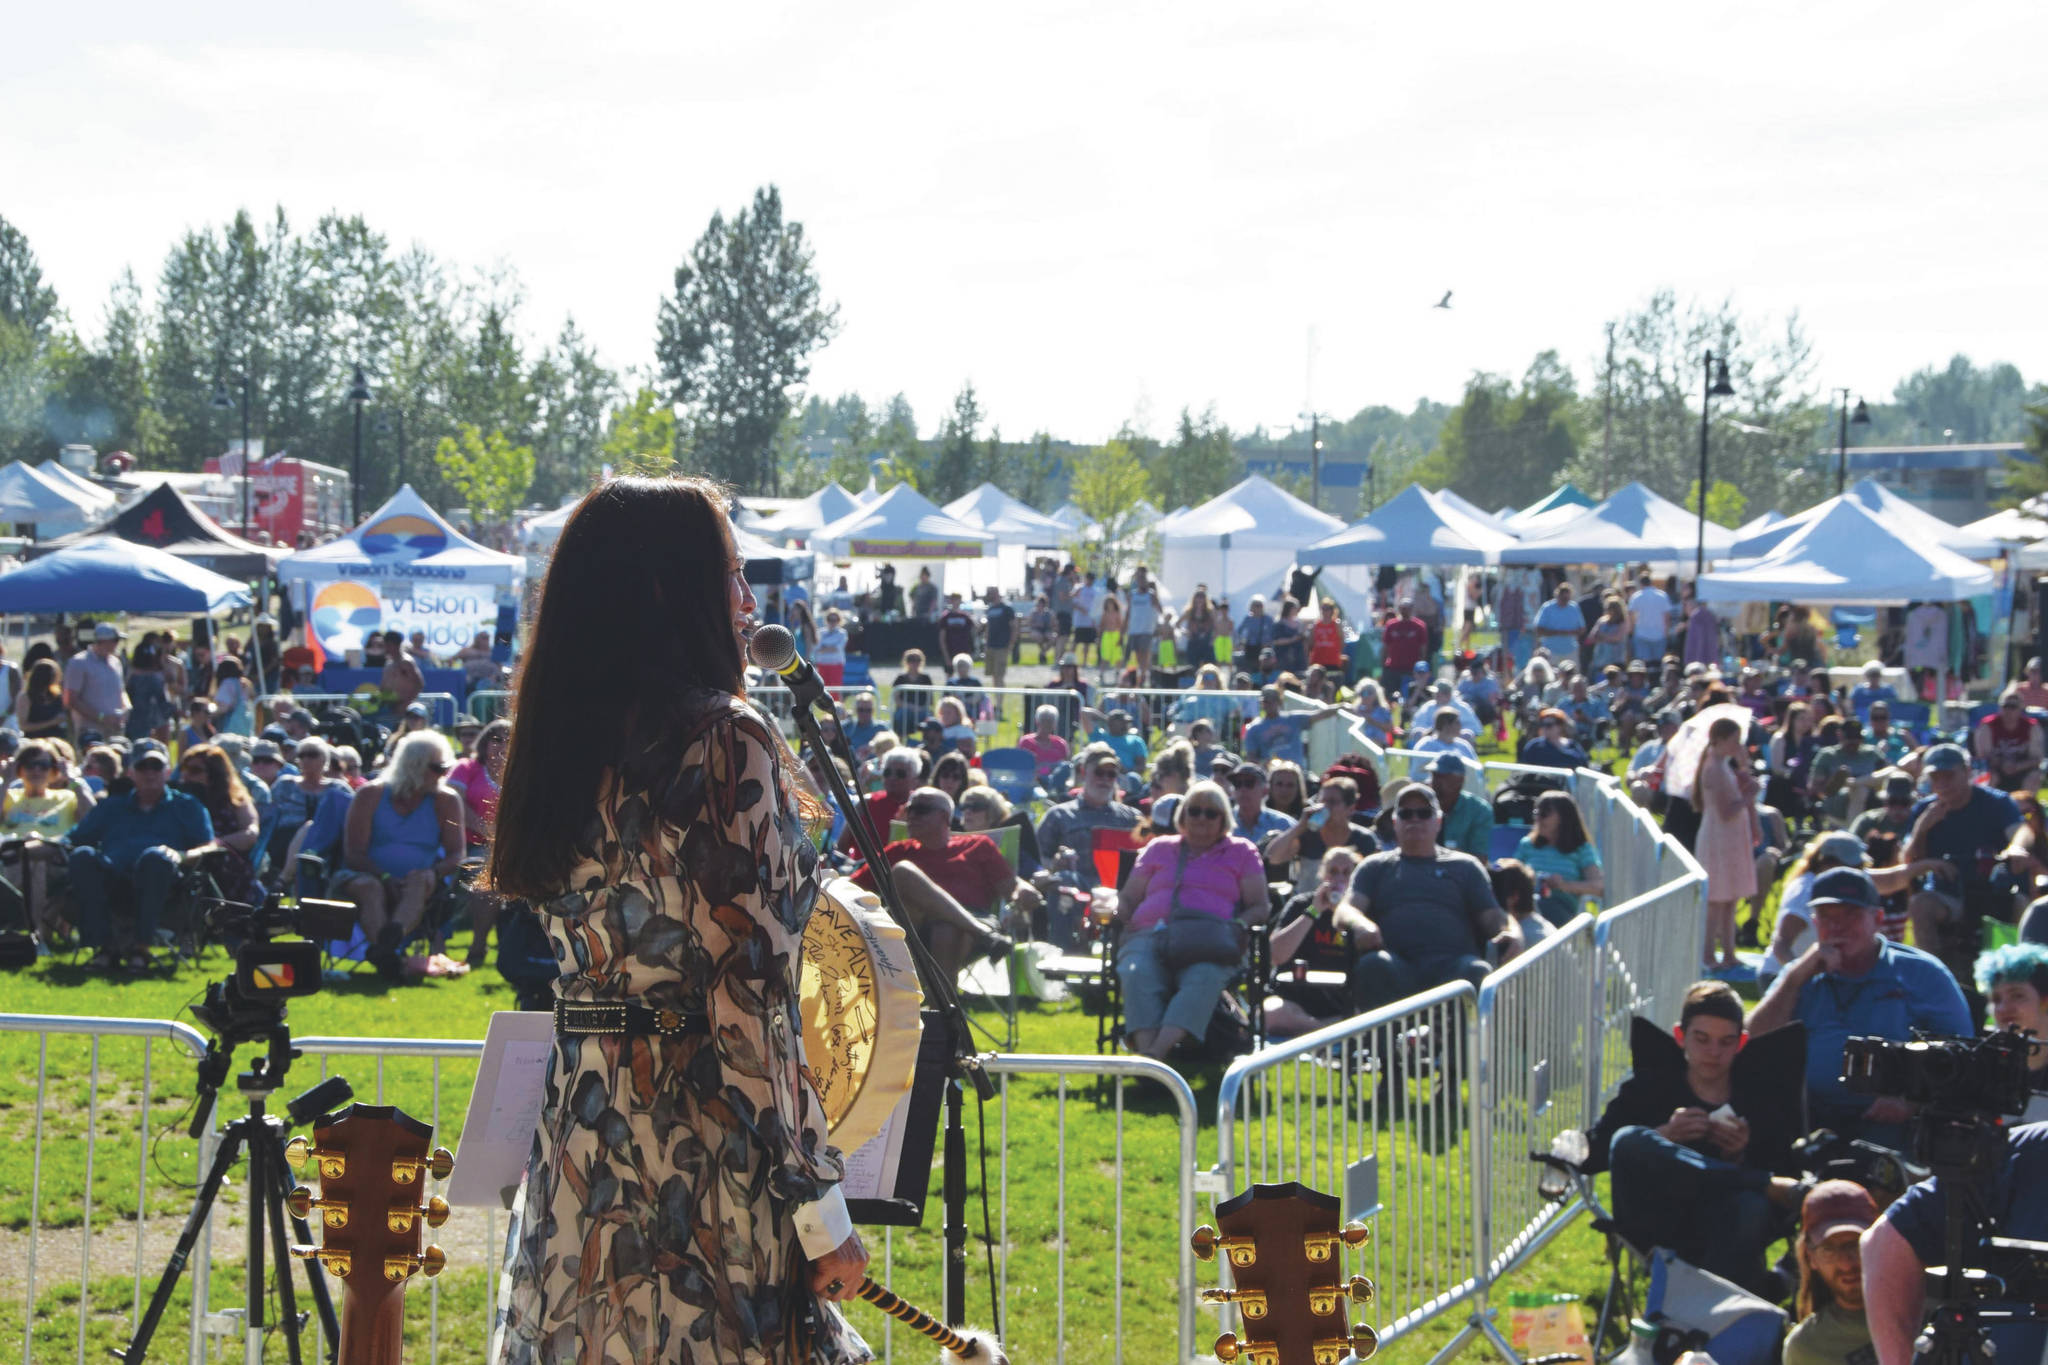 Bunny Swan performs at Soldotna Creek Park on July 3, 2019 as part of the Levitt Amp Soldotna Music Series. (Photo by Brian Mazurek/Peninsula Clarion)